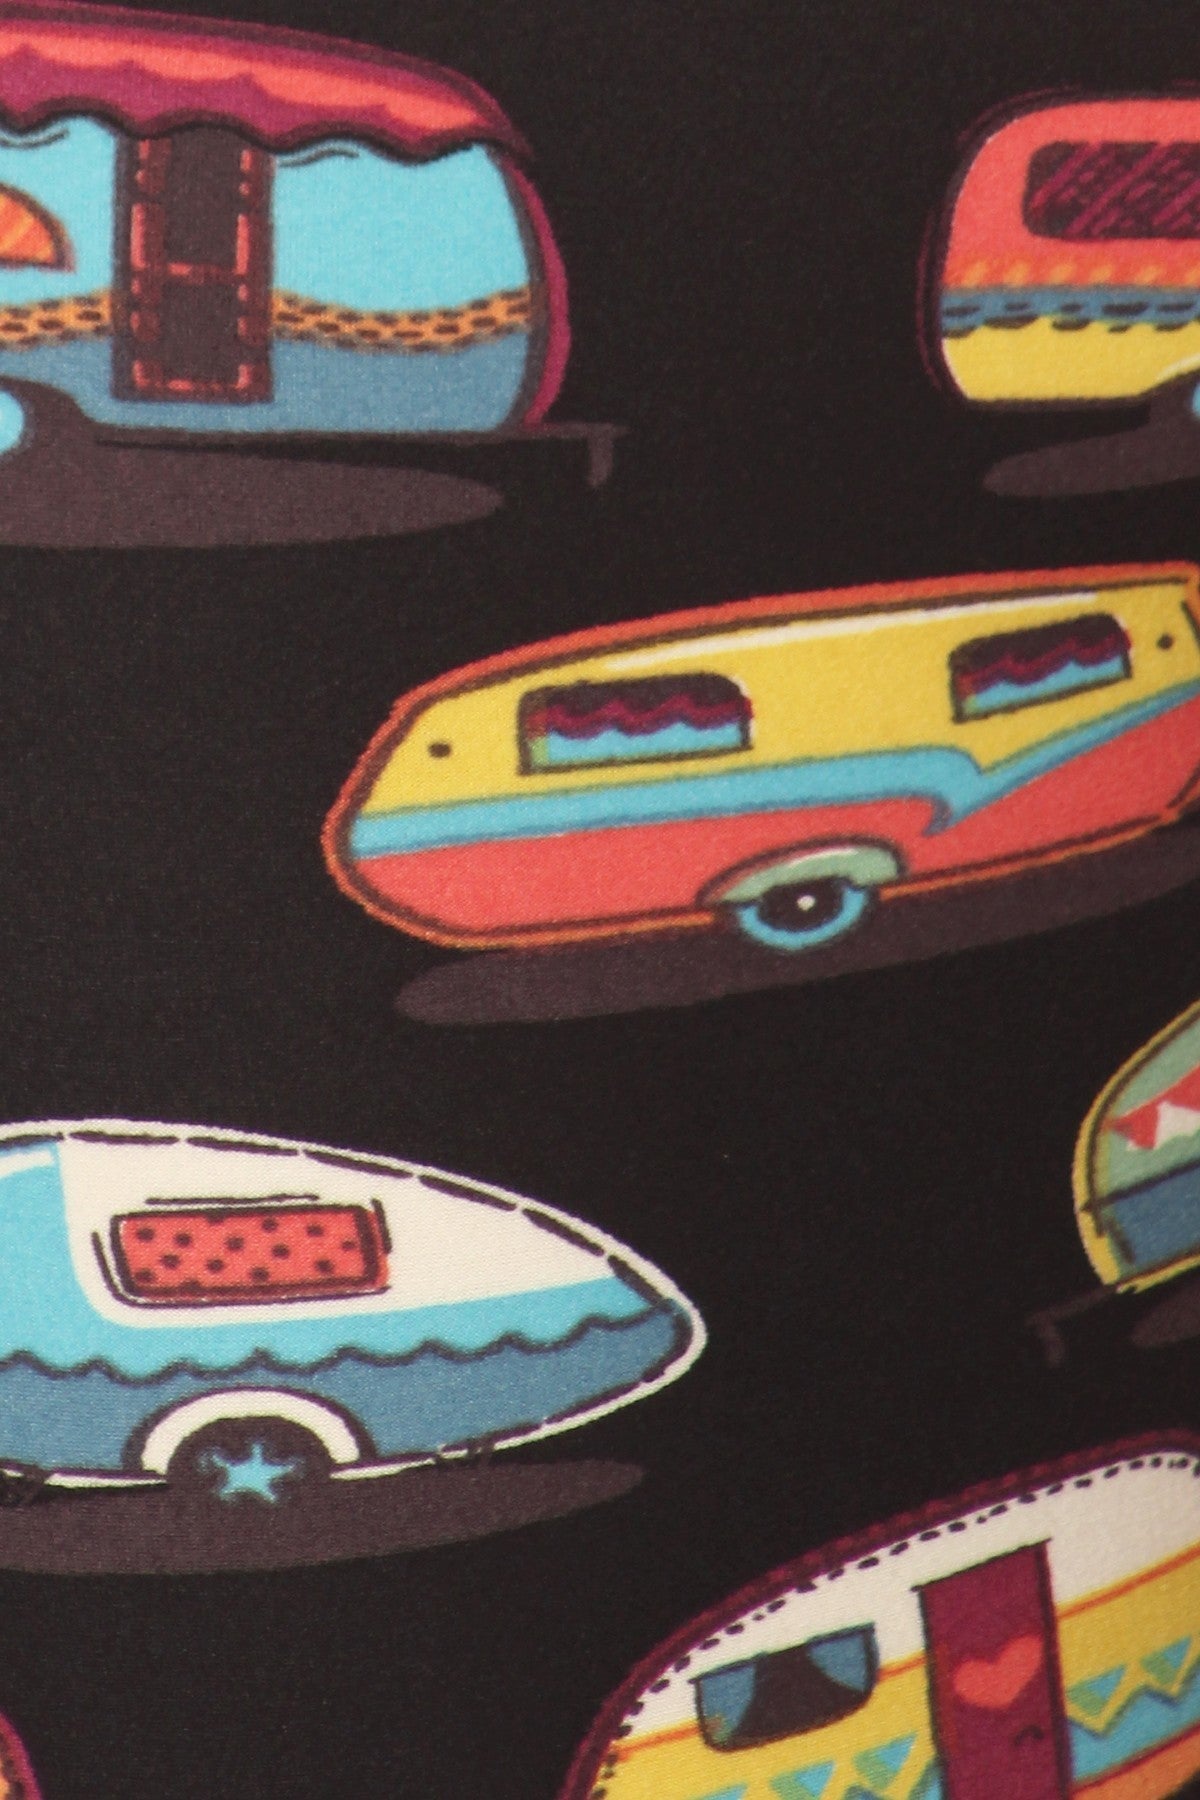 Multicolored Campers Printed, High Waisted Leggings In A Fit Style, With An Elastic Waistband Bottoms jehouze 